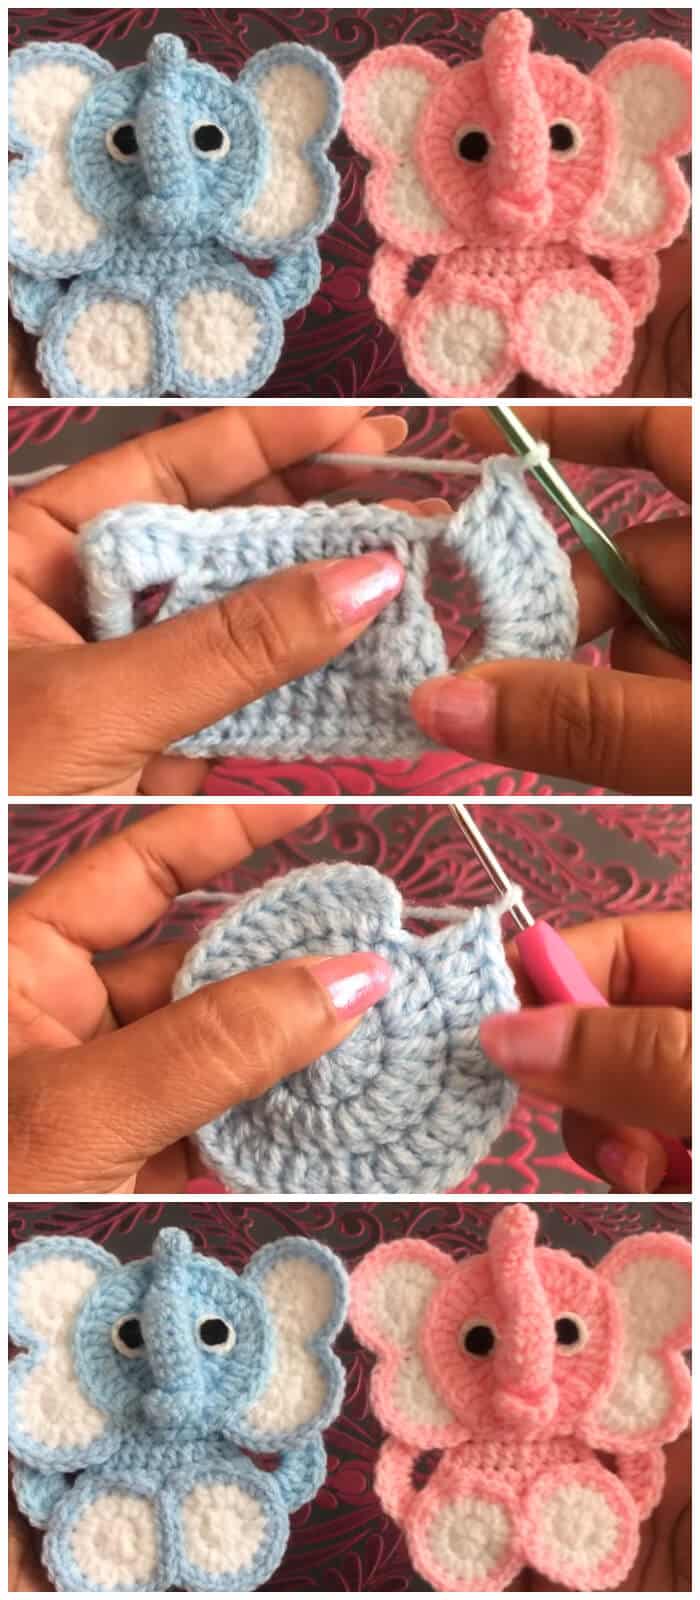 Crochet elephant projects make great gifts for new babies, children's birthdays, Christmas gifts and nursery decor. If you are an animal lover then this crochet tutorial is for you.